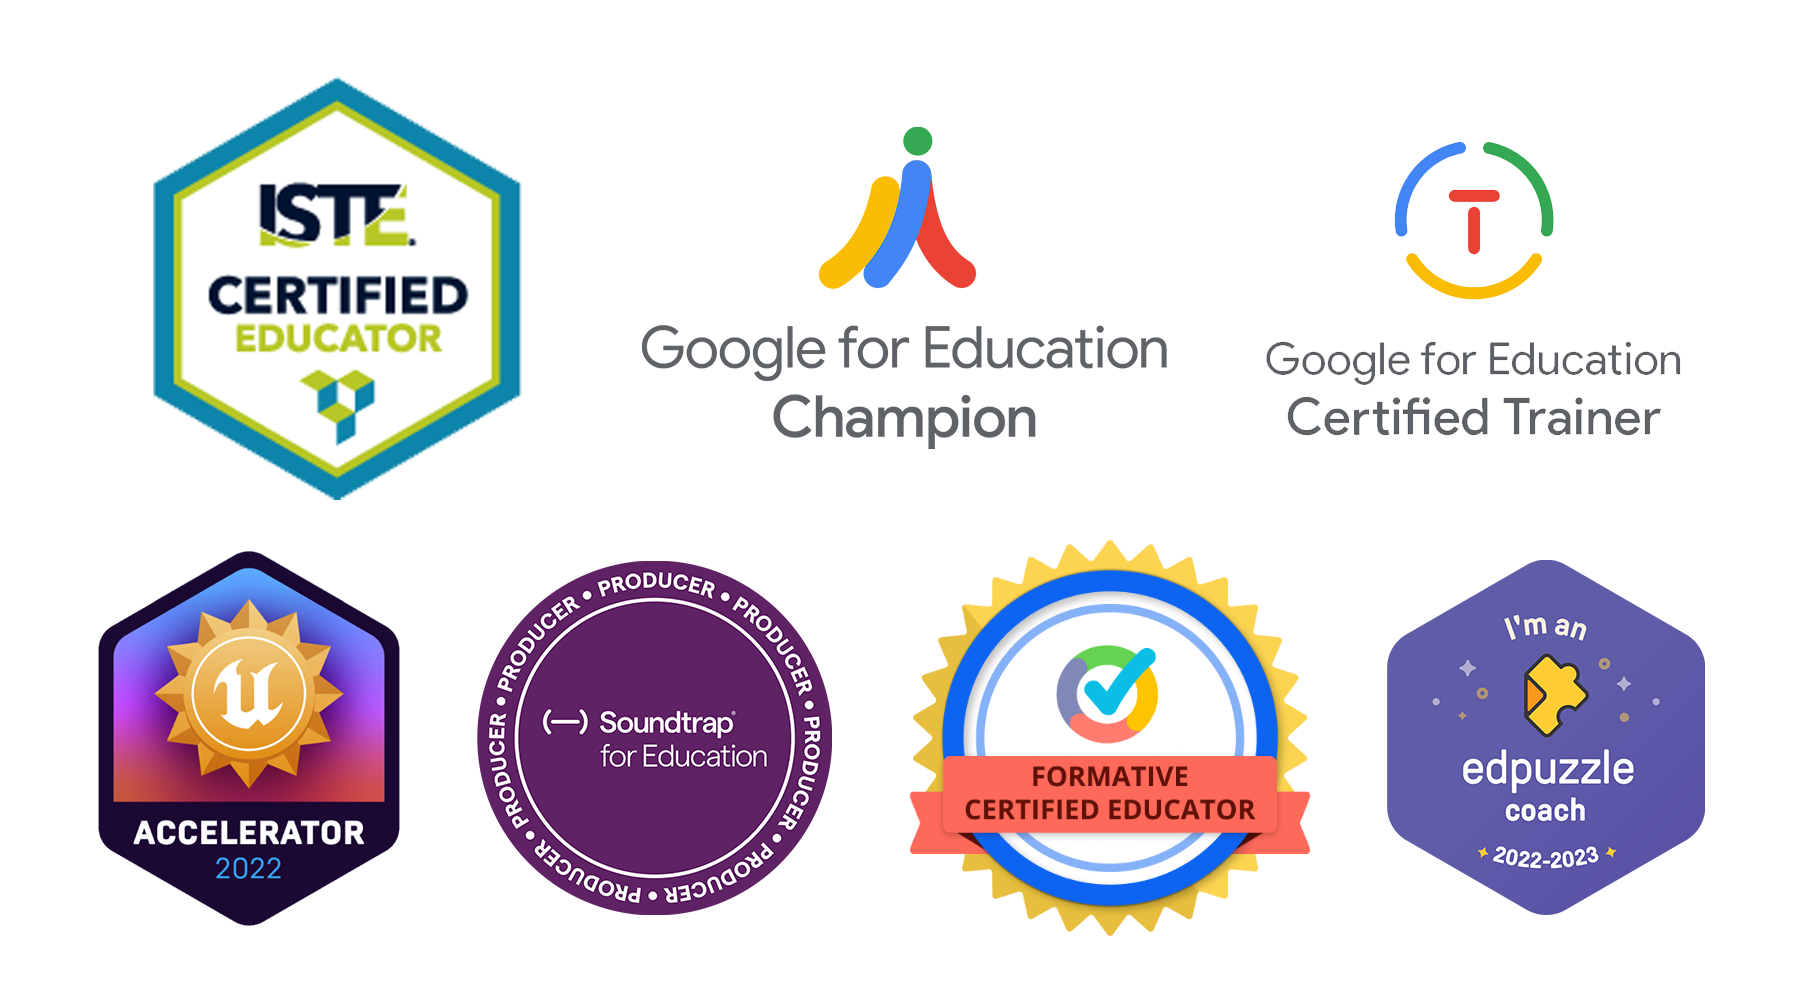 Badges for ISTE Certified Educator, Google for Education Champion, Google for Education Certified Trainer, Unreal Accelerator 2022, Soundtrap for Education Producer, Formative Certified Educator, and EdPuzzle Coach 2022-2023